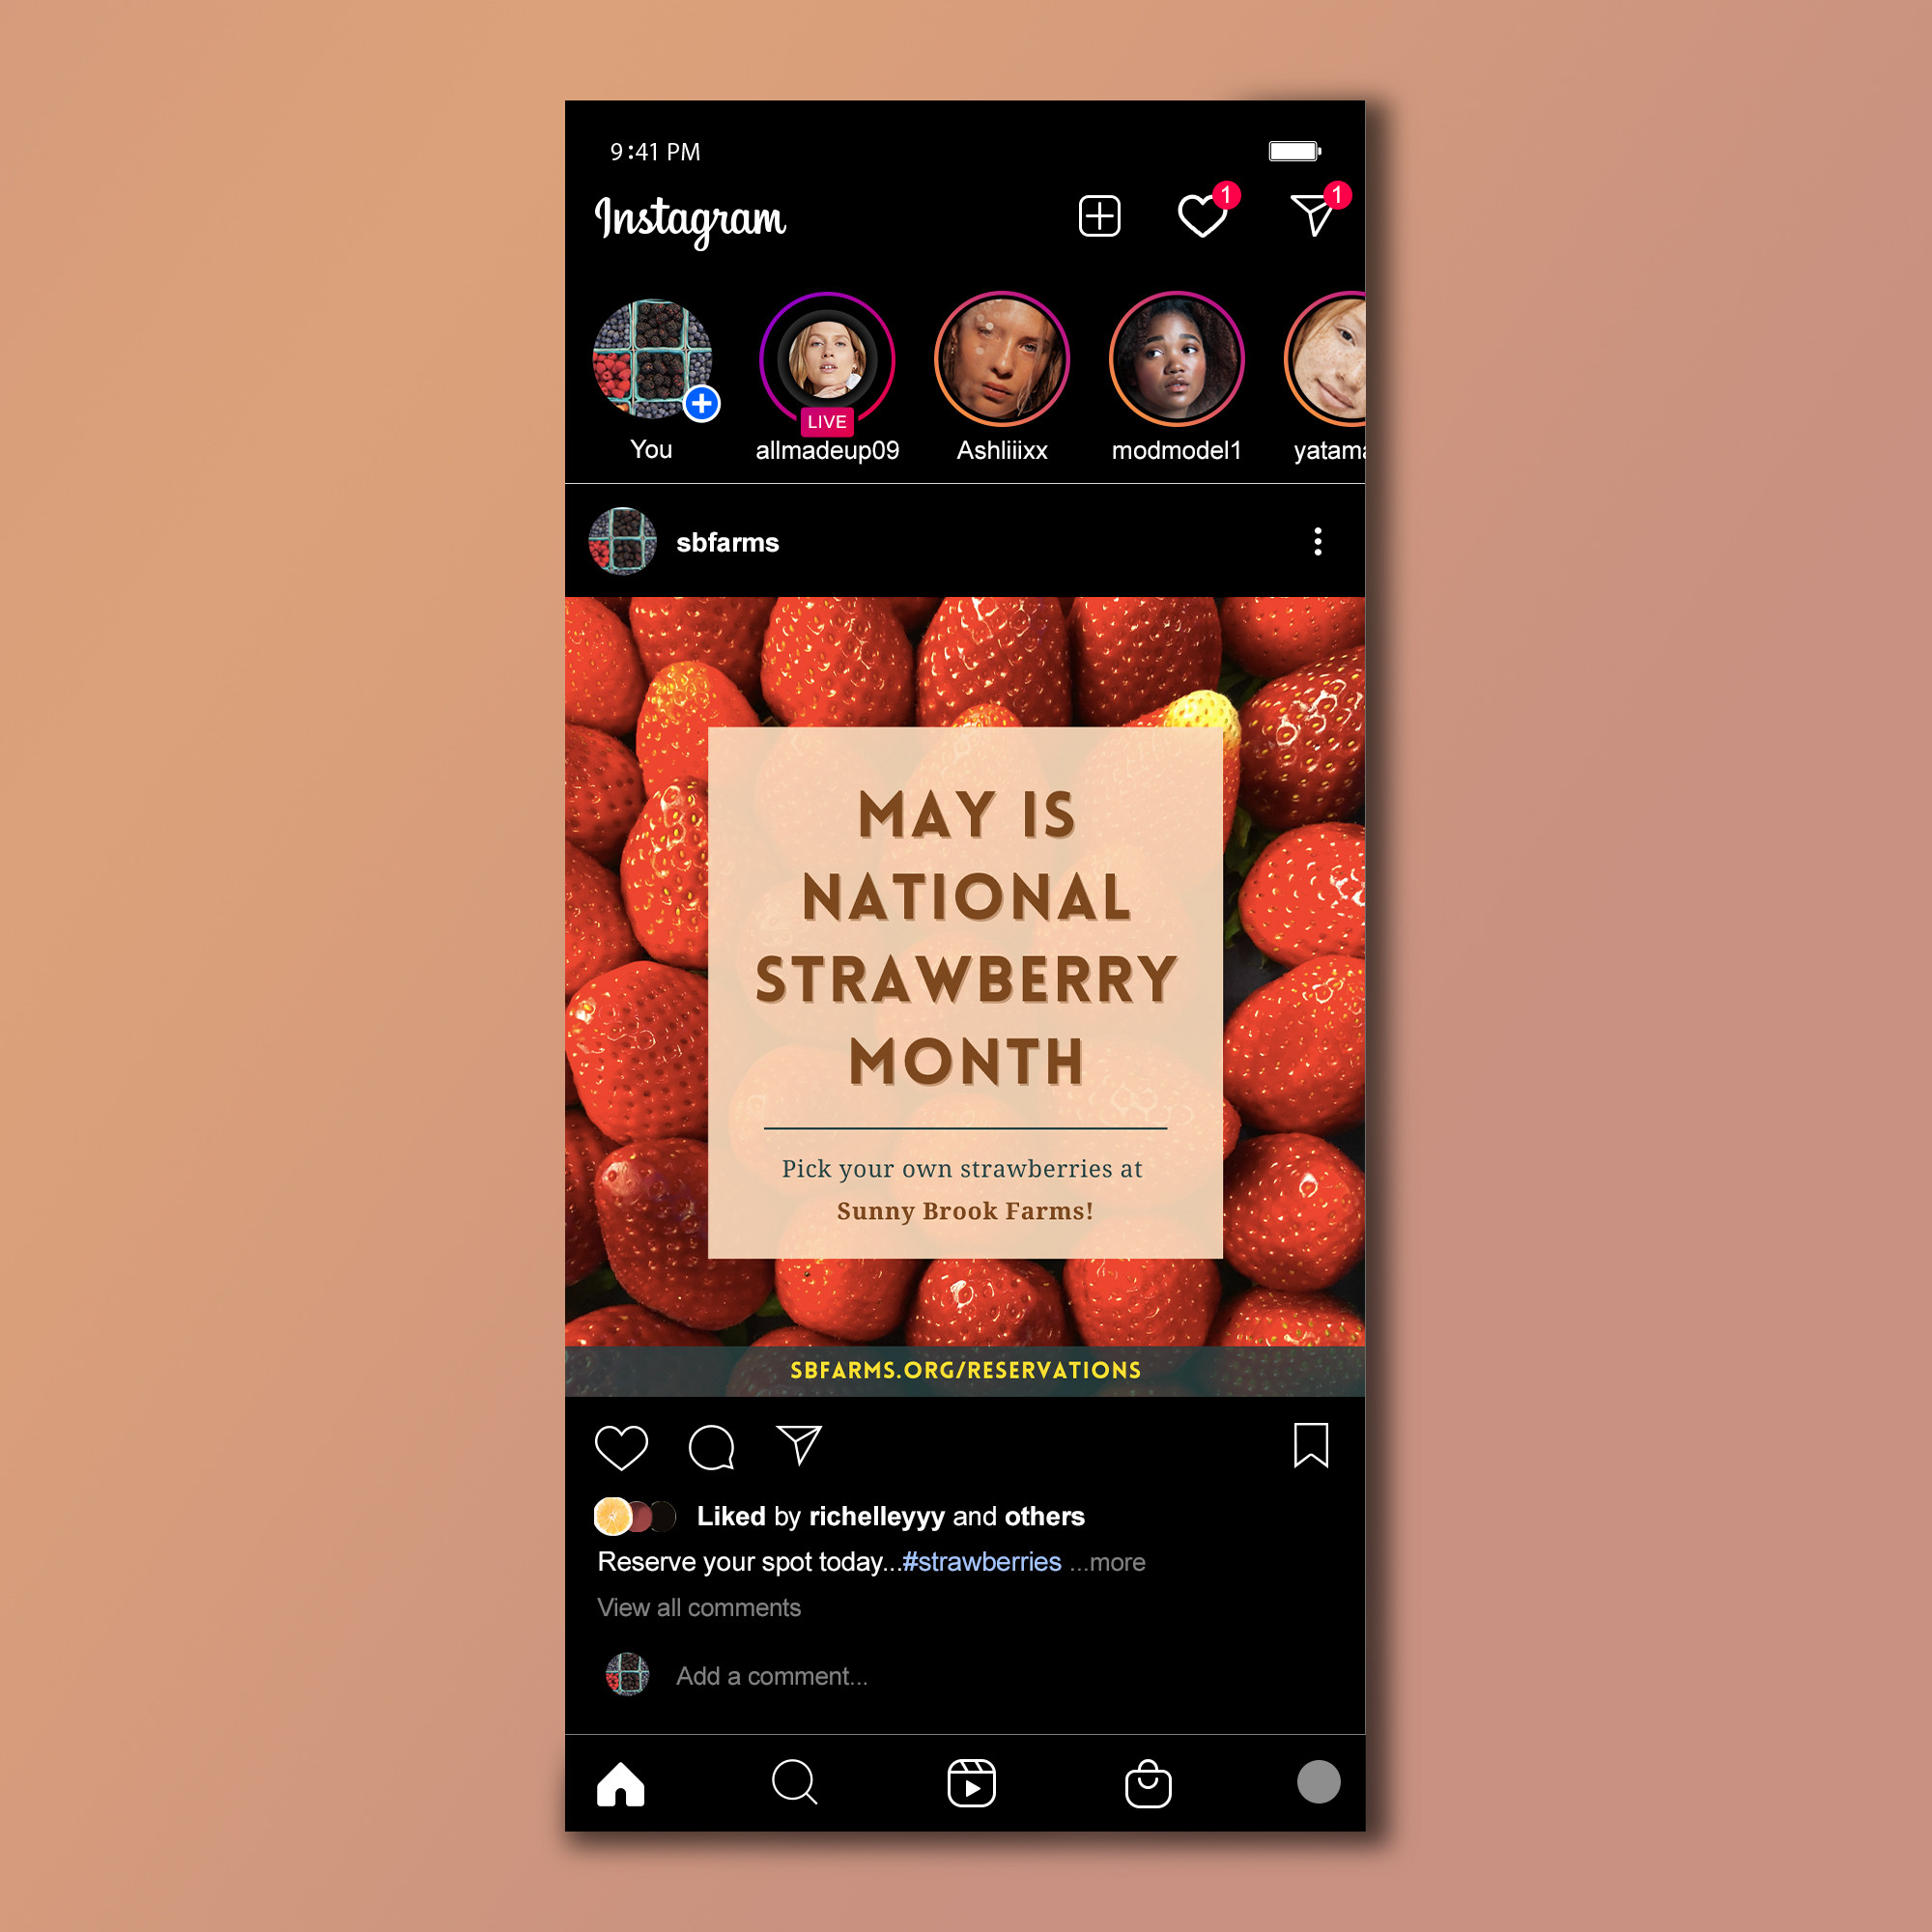 Instagram post on a mockup but this time about national strawberry month.